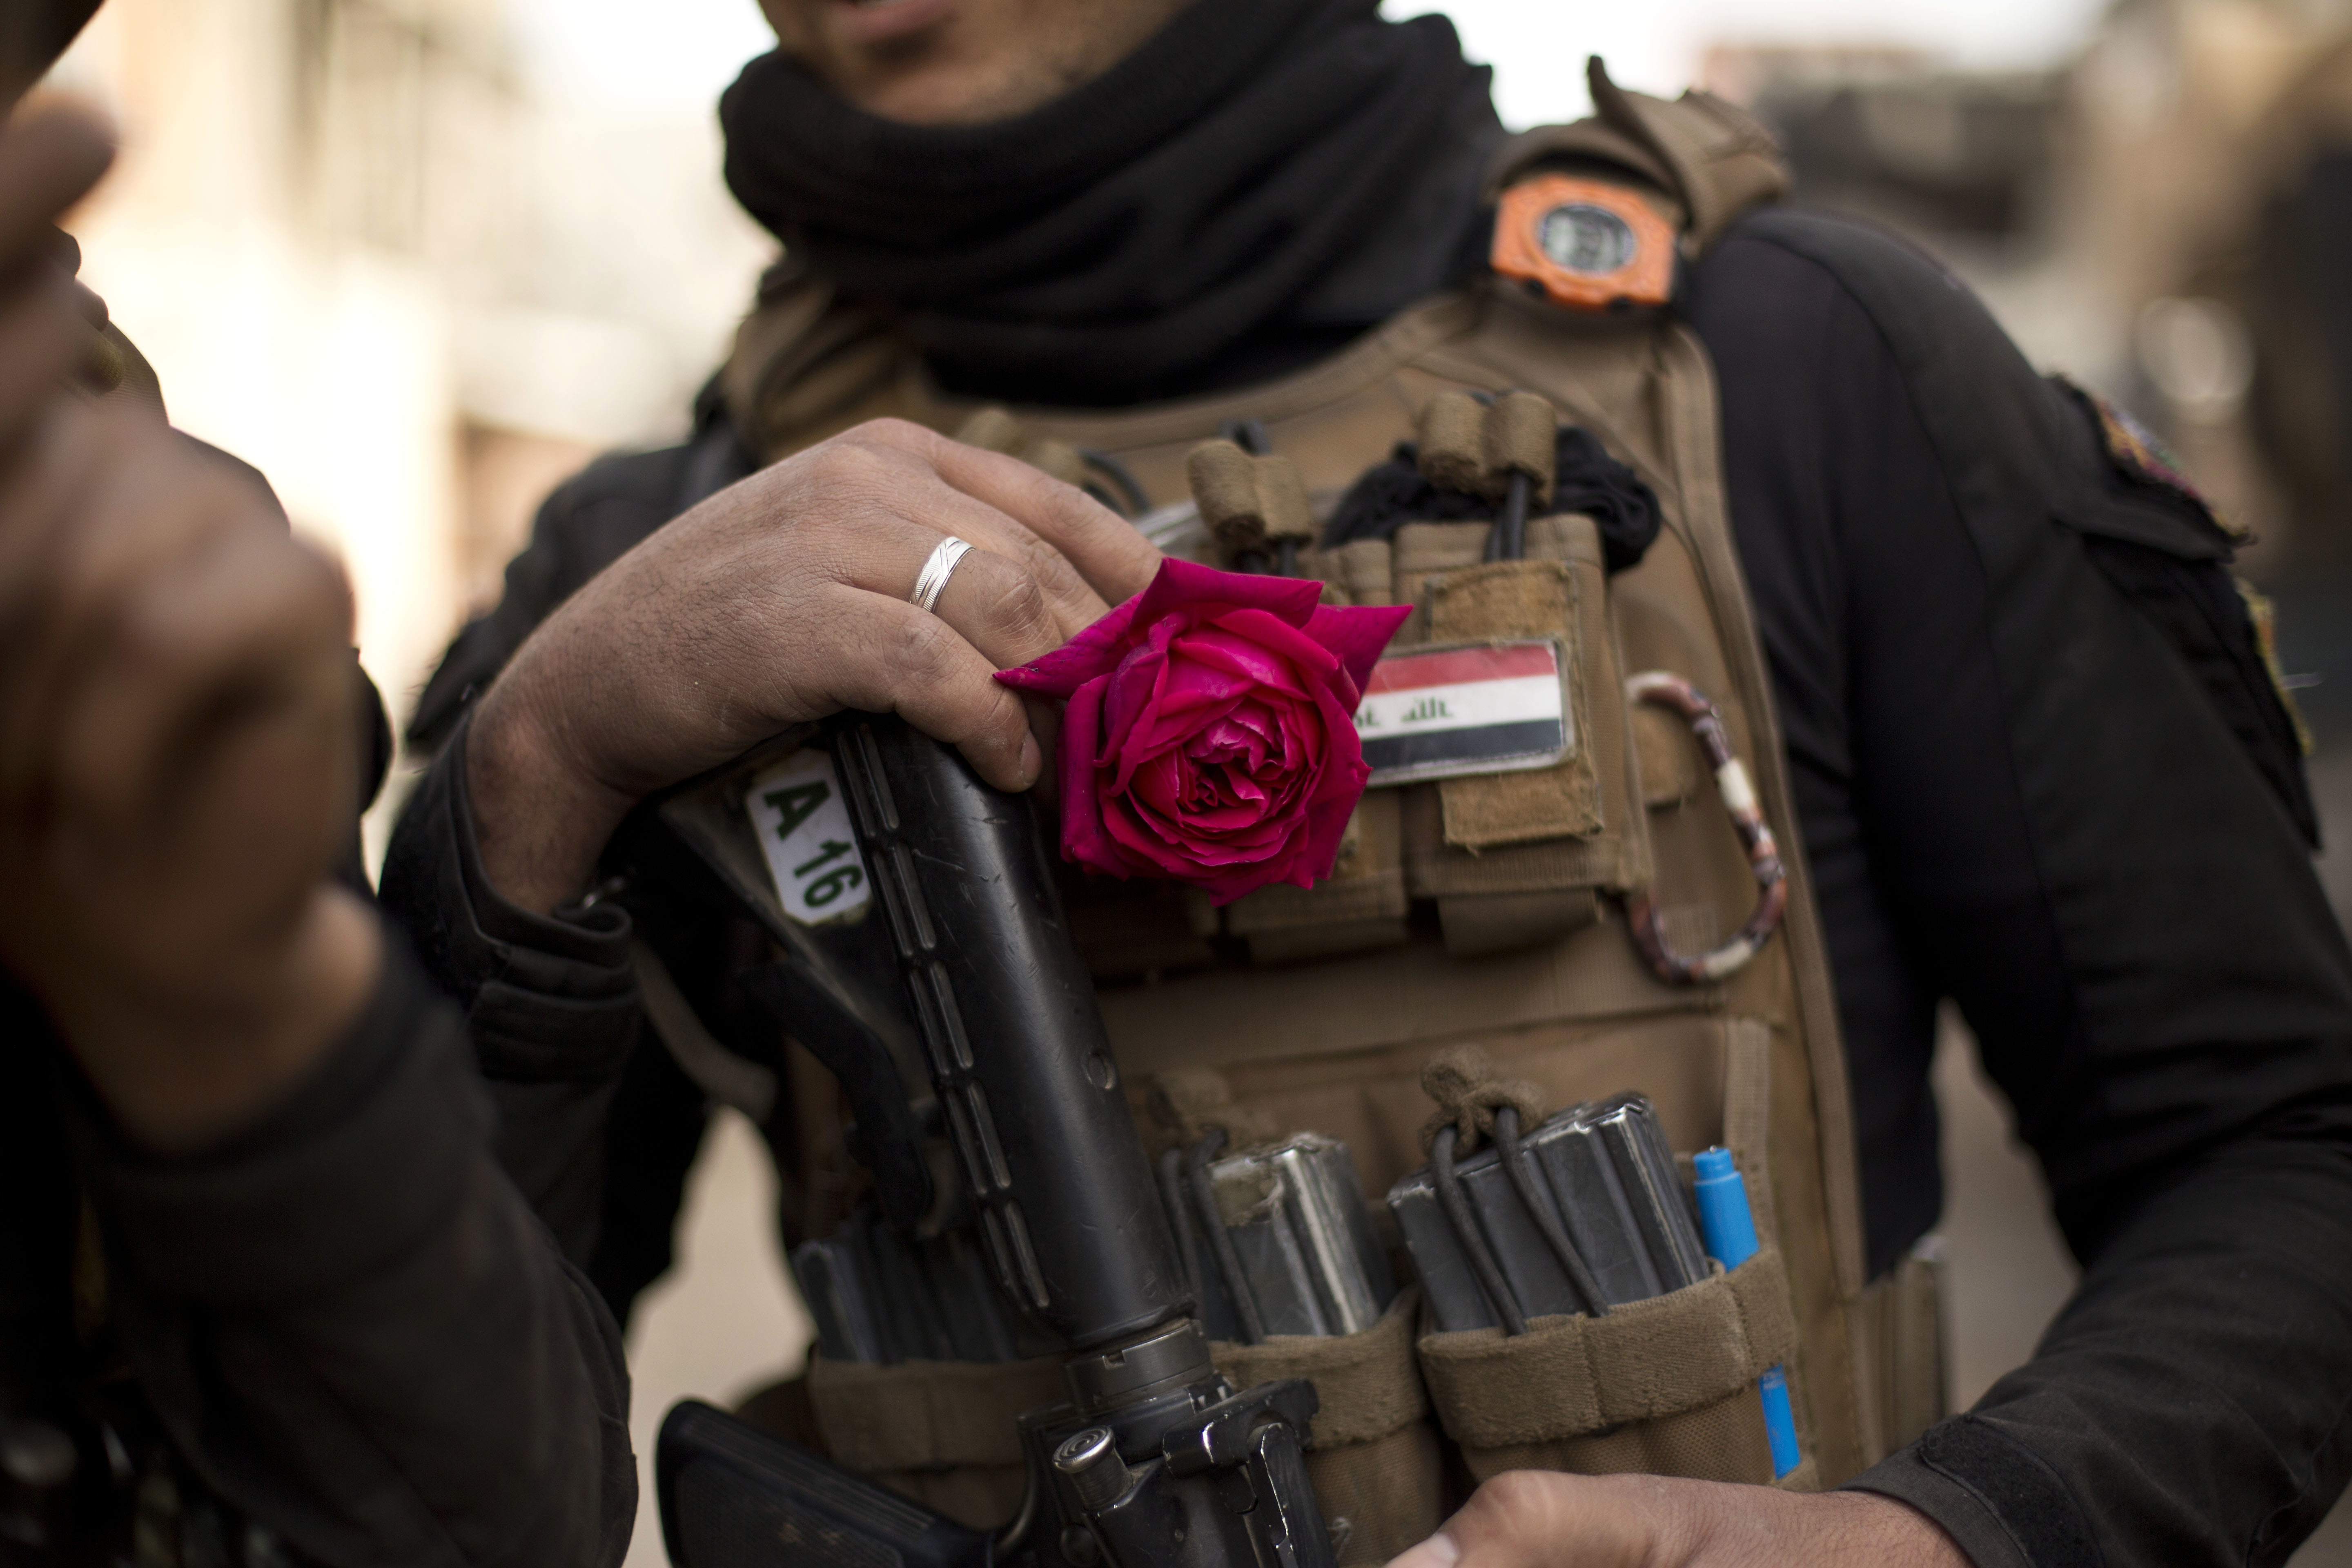 An Iraqi special forces soldier wears a rose in his body armor as troops move from the Yarmouk neighborhood to take another district from Islamic State militant control in Mosul, Iraq, Wednesday, April 12, 2017. (AP Photo/Maya Alleruzzo)